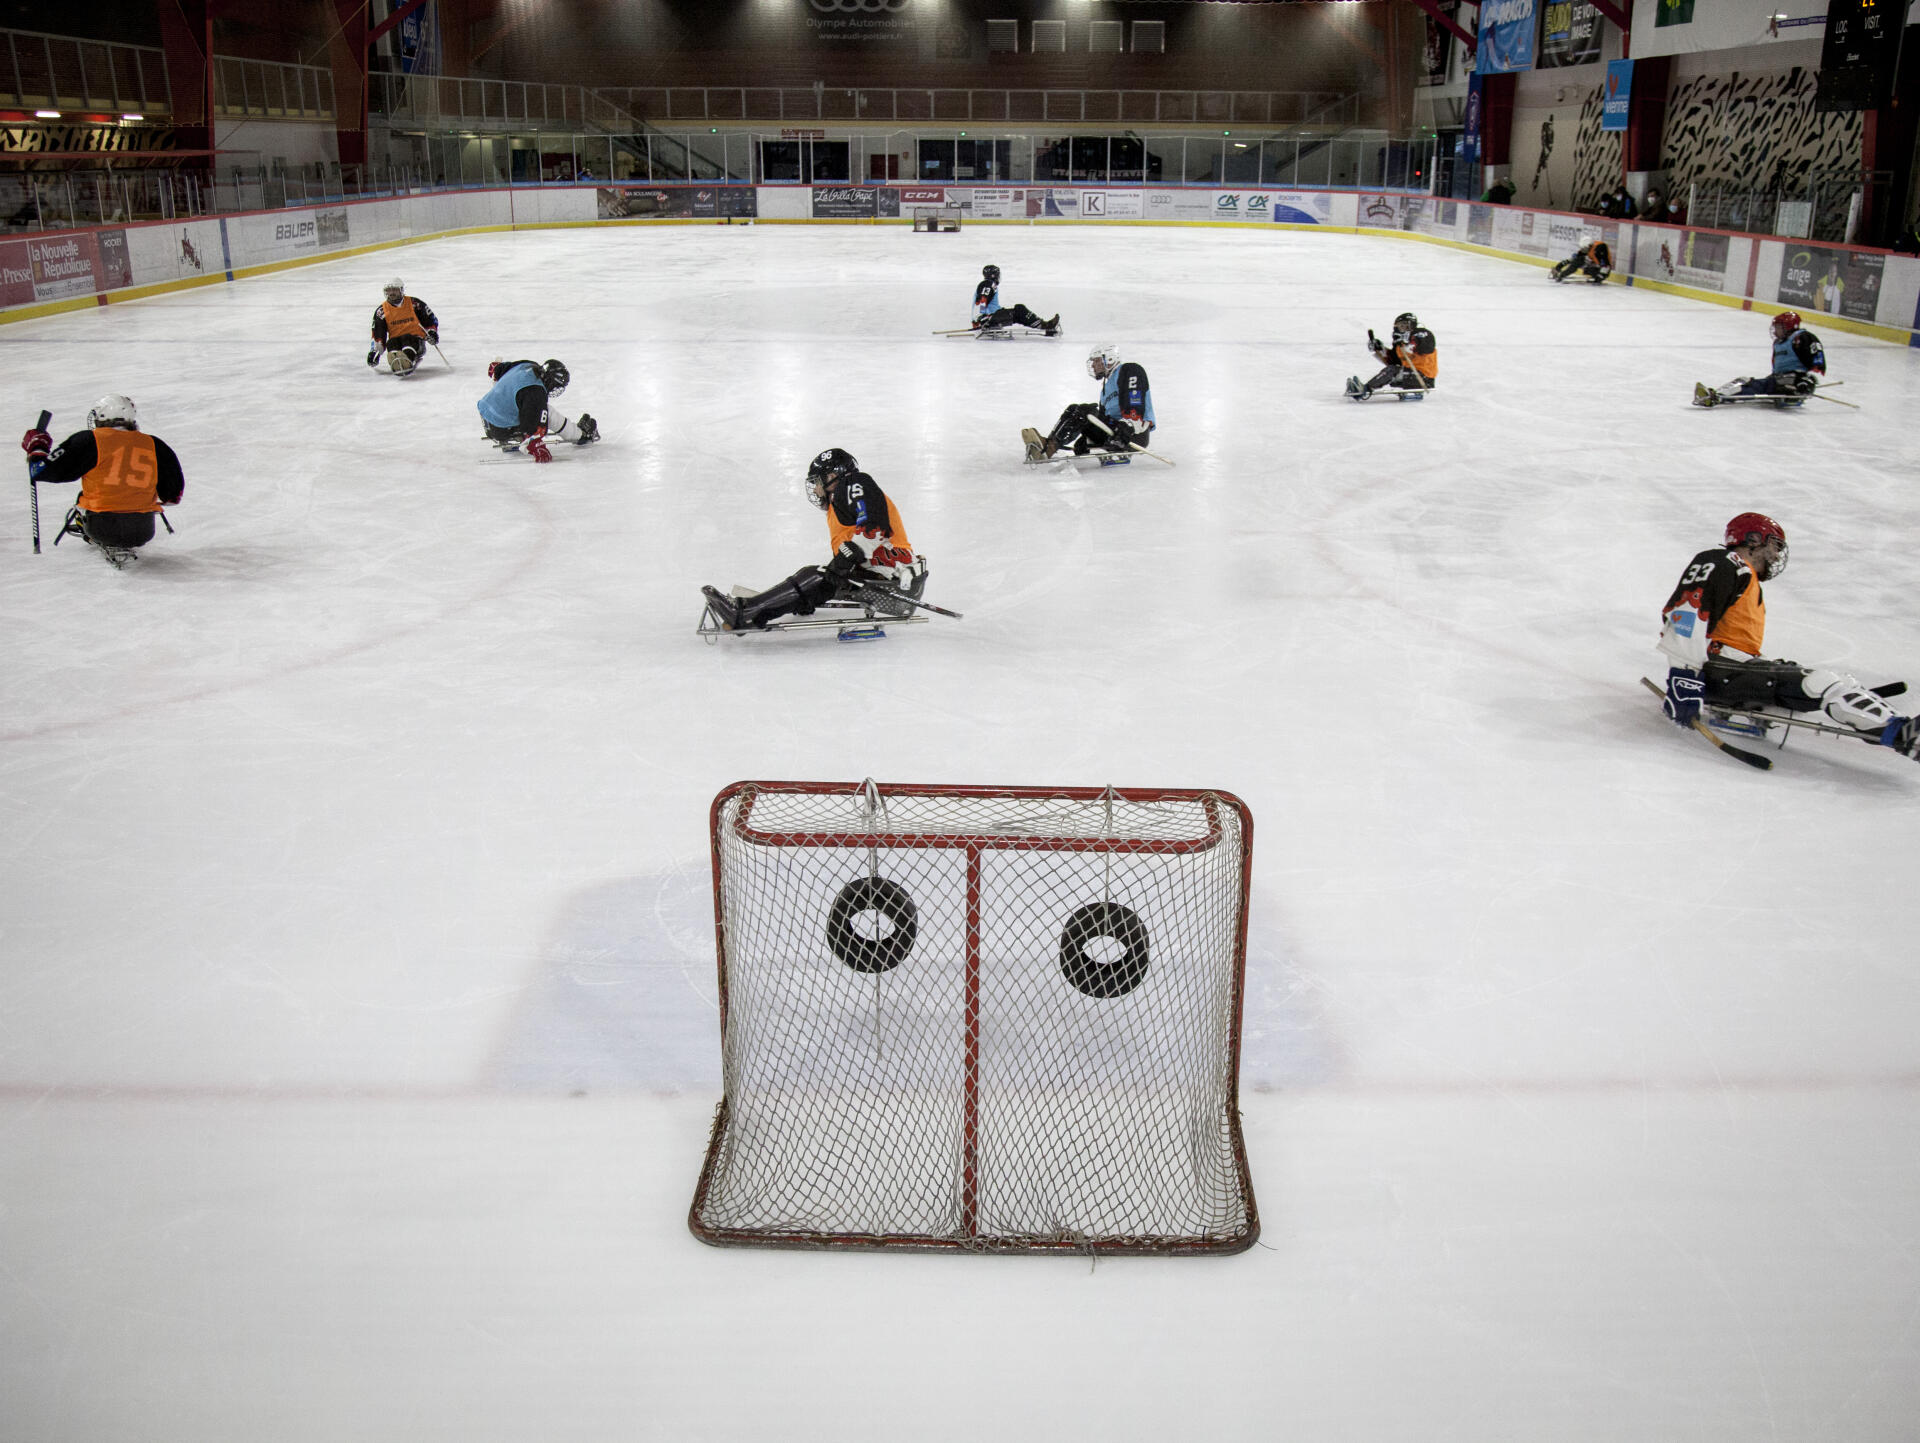 Para ice hockey players in training at the Poitiers ice rink, January 12, 2022.